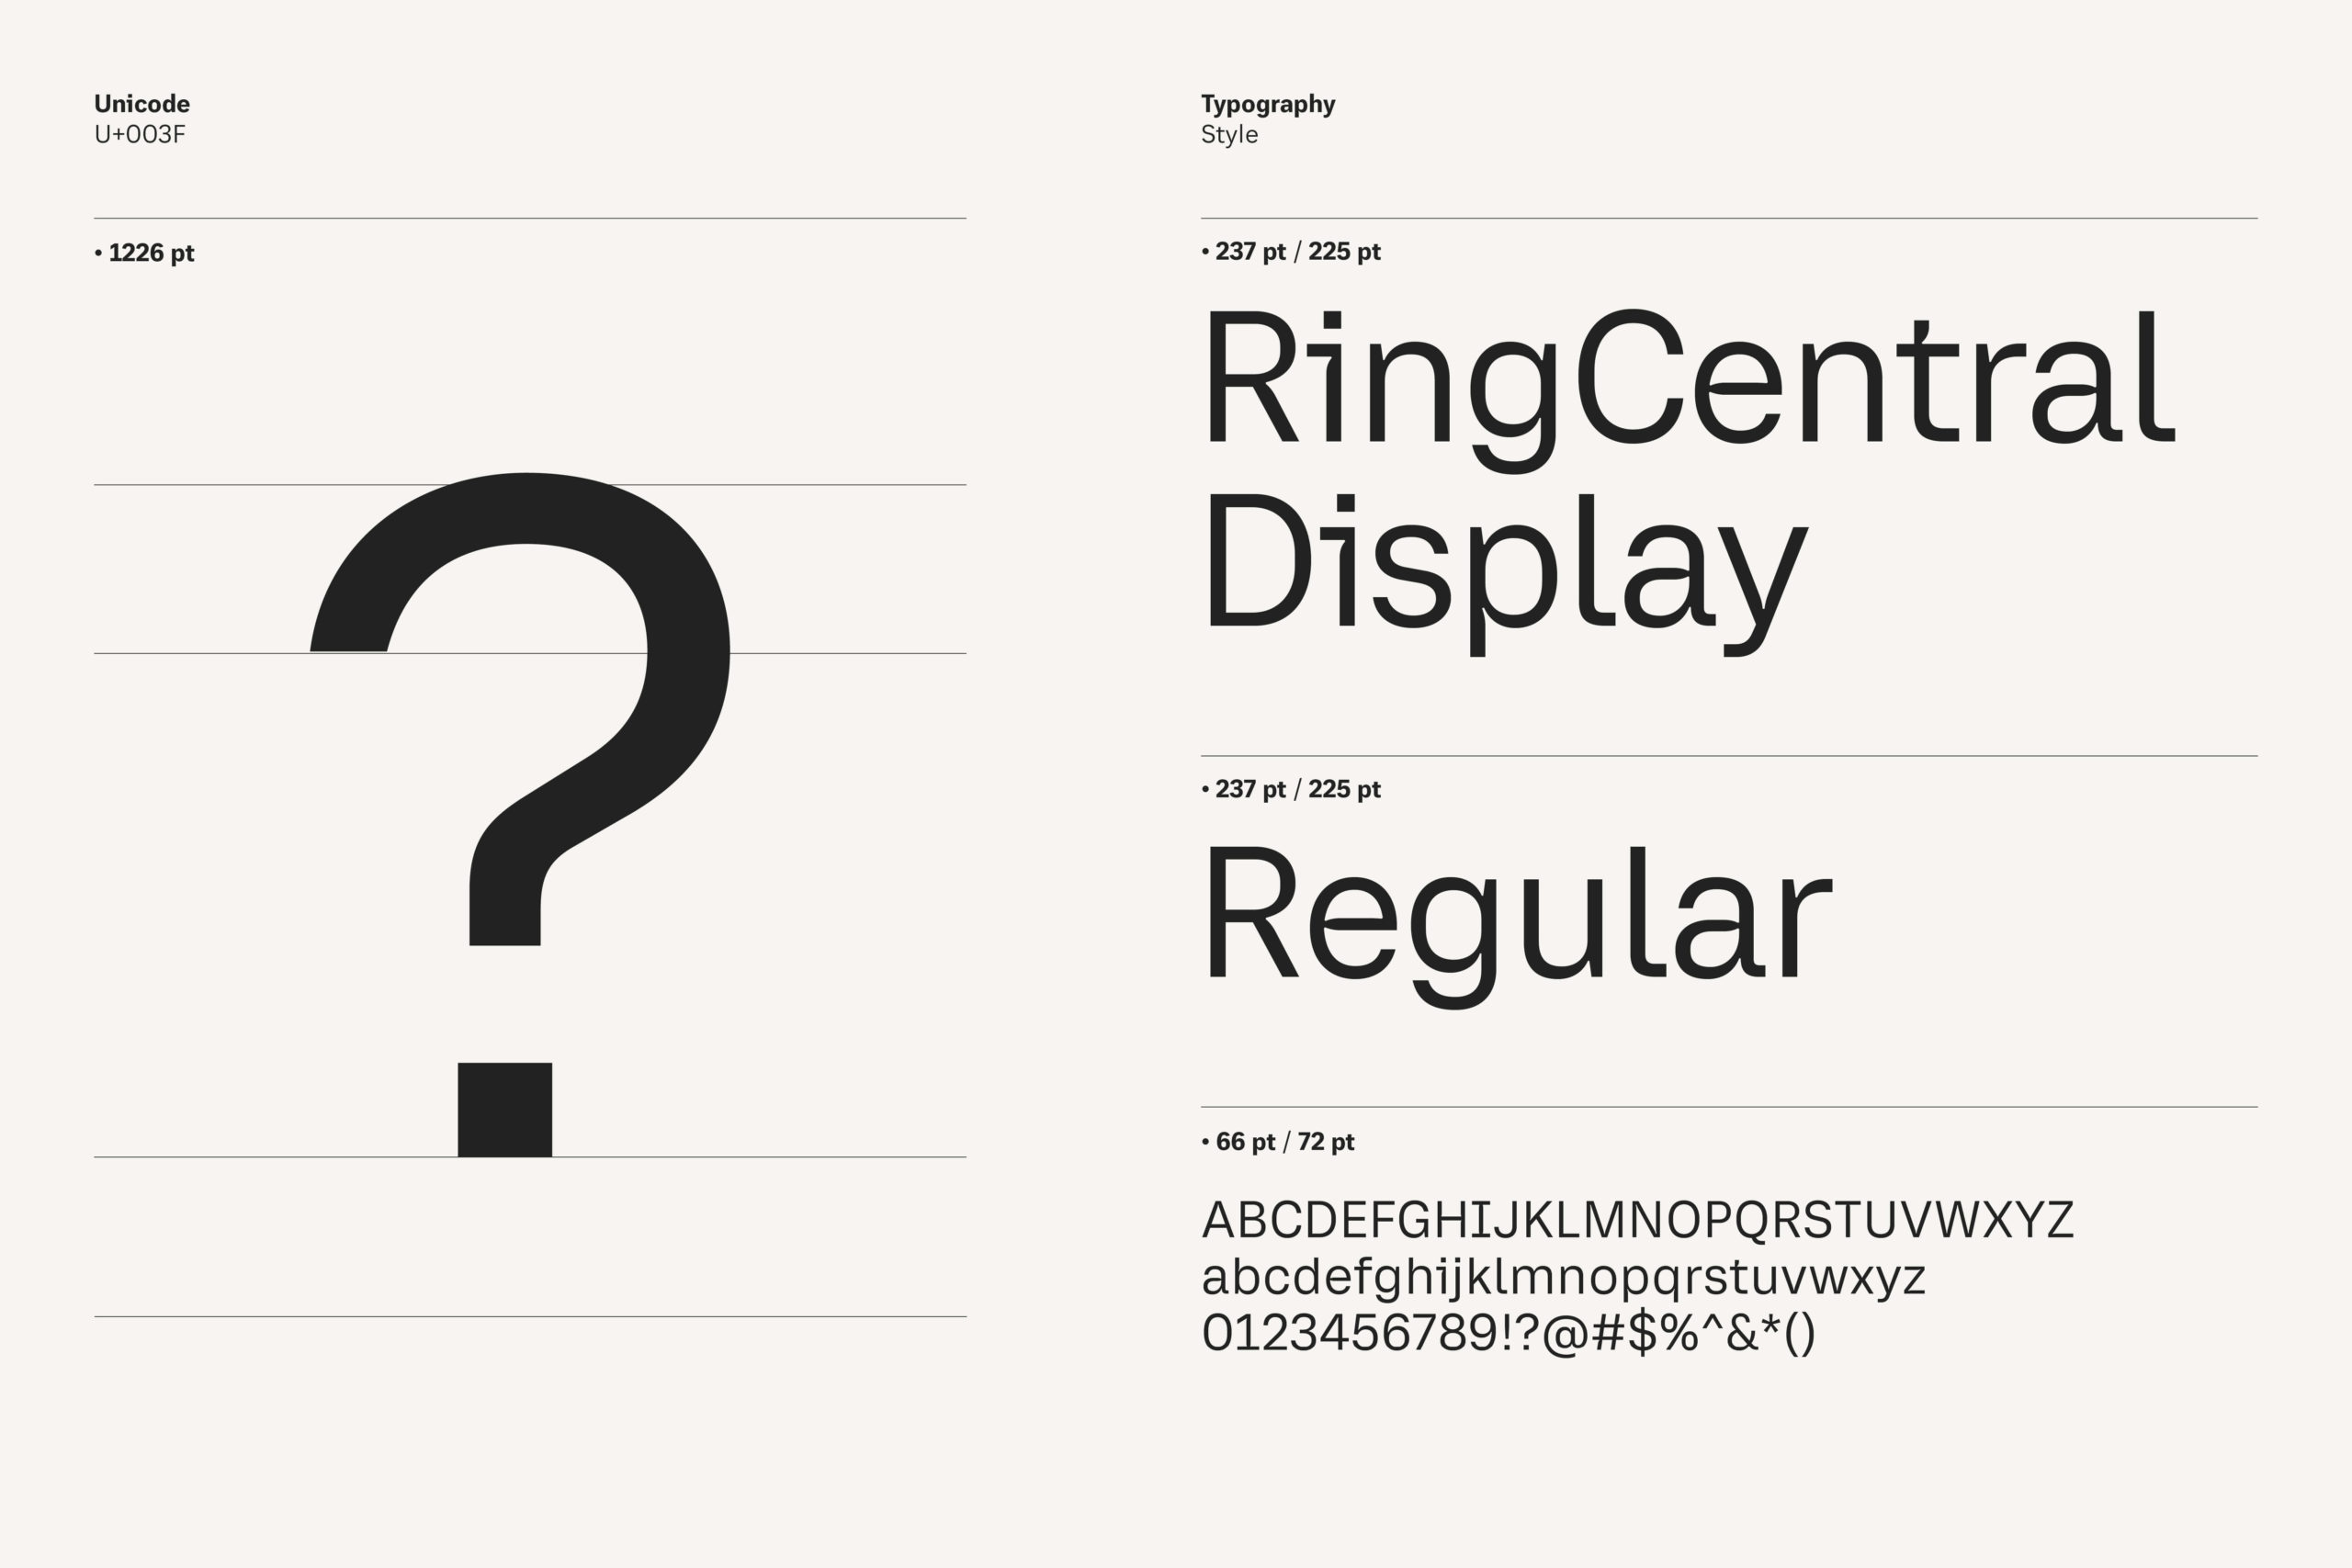 RingCentral Display_Typeface_09142220